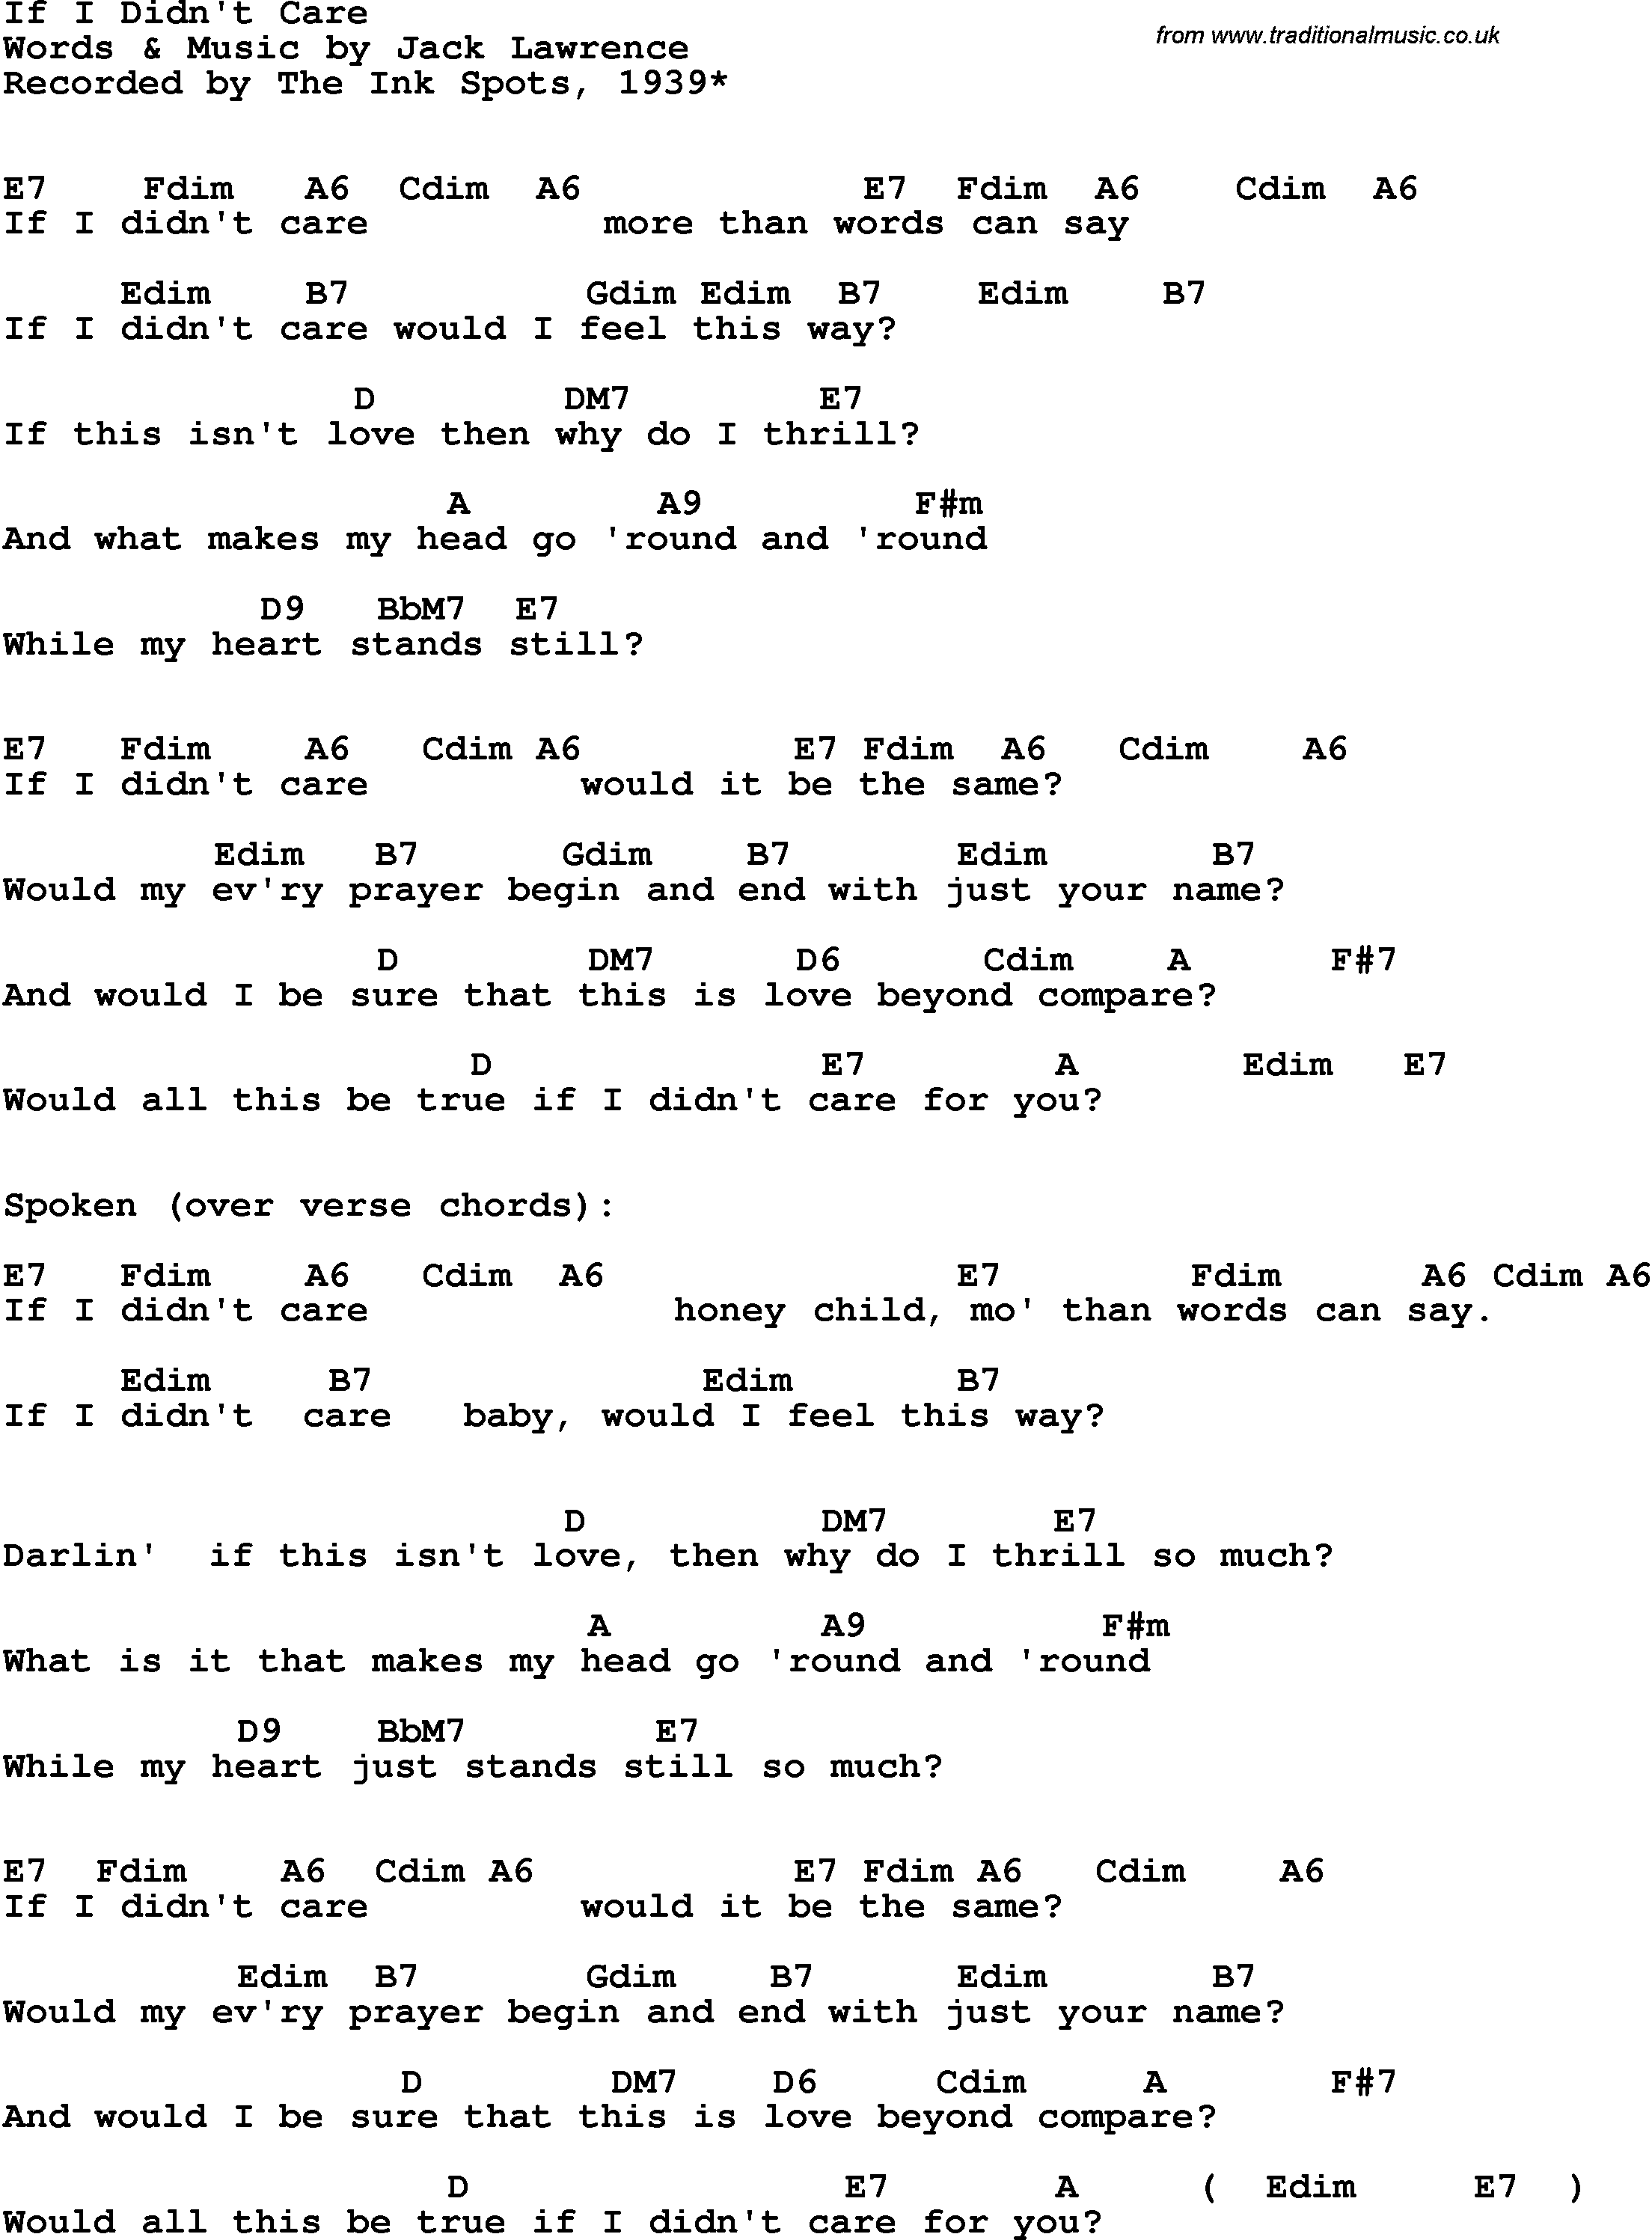 Song Lyrics with guitar chords for If I Didn't Care - The Platters, 1961